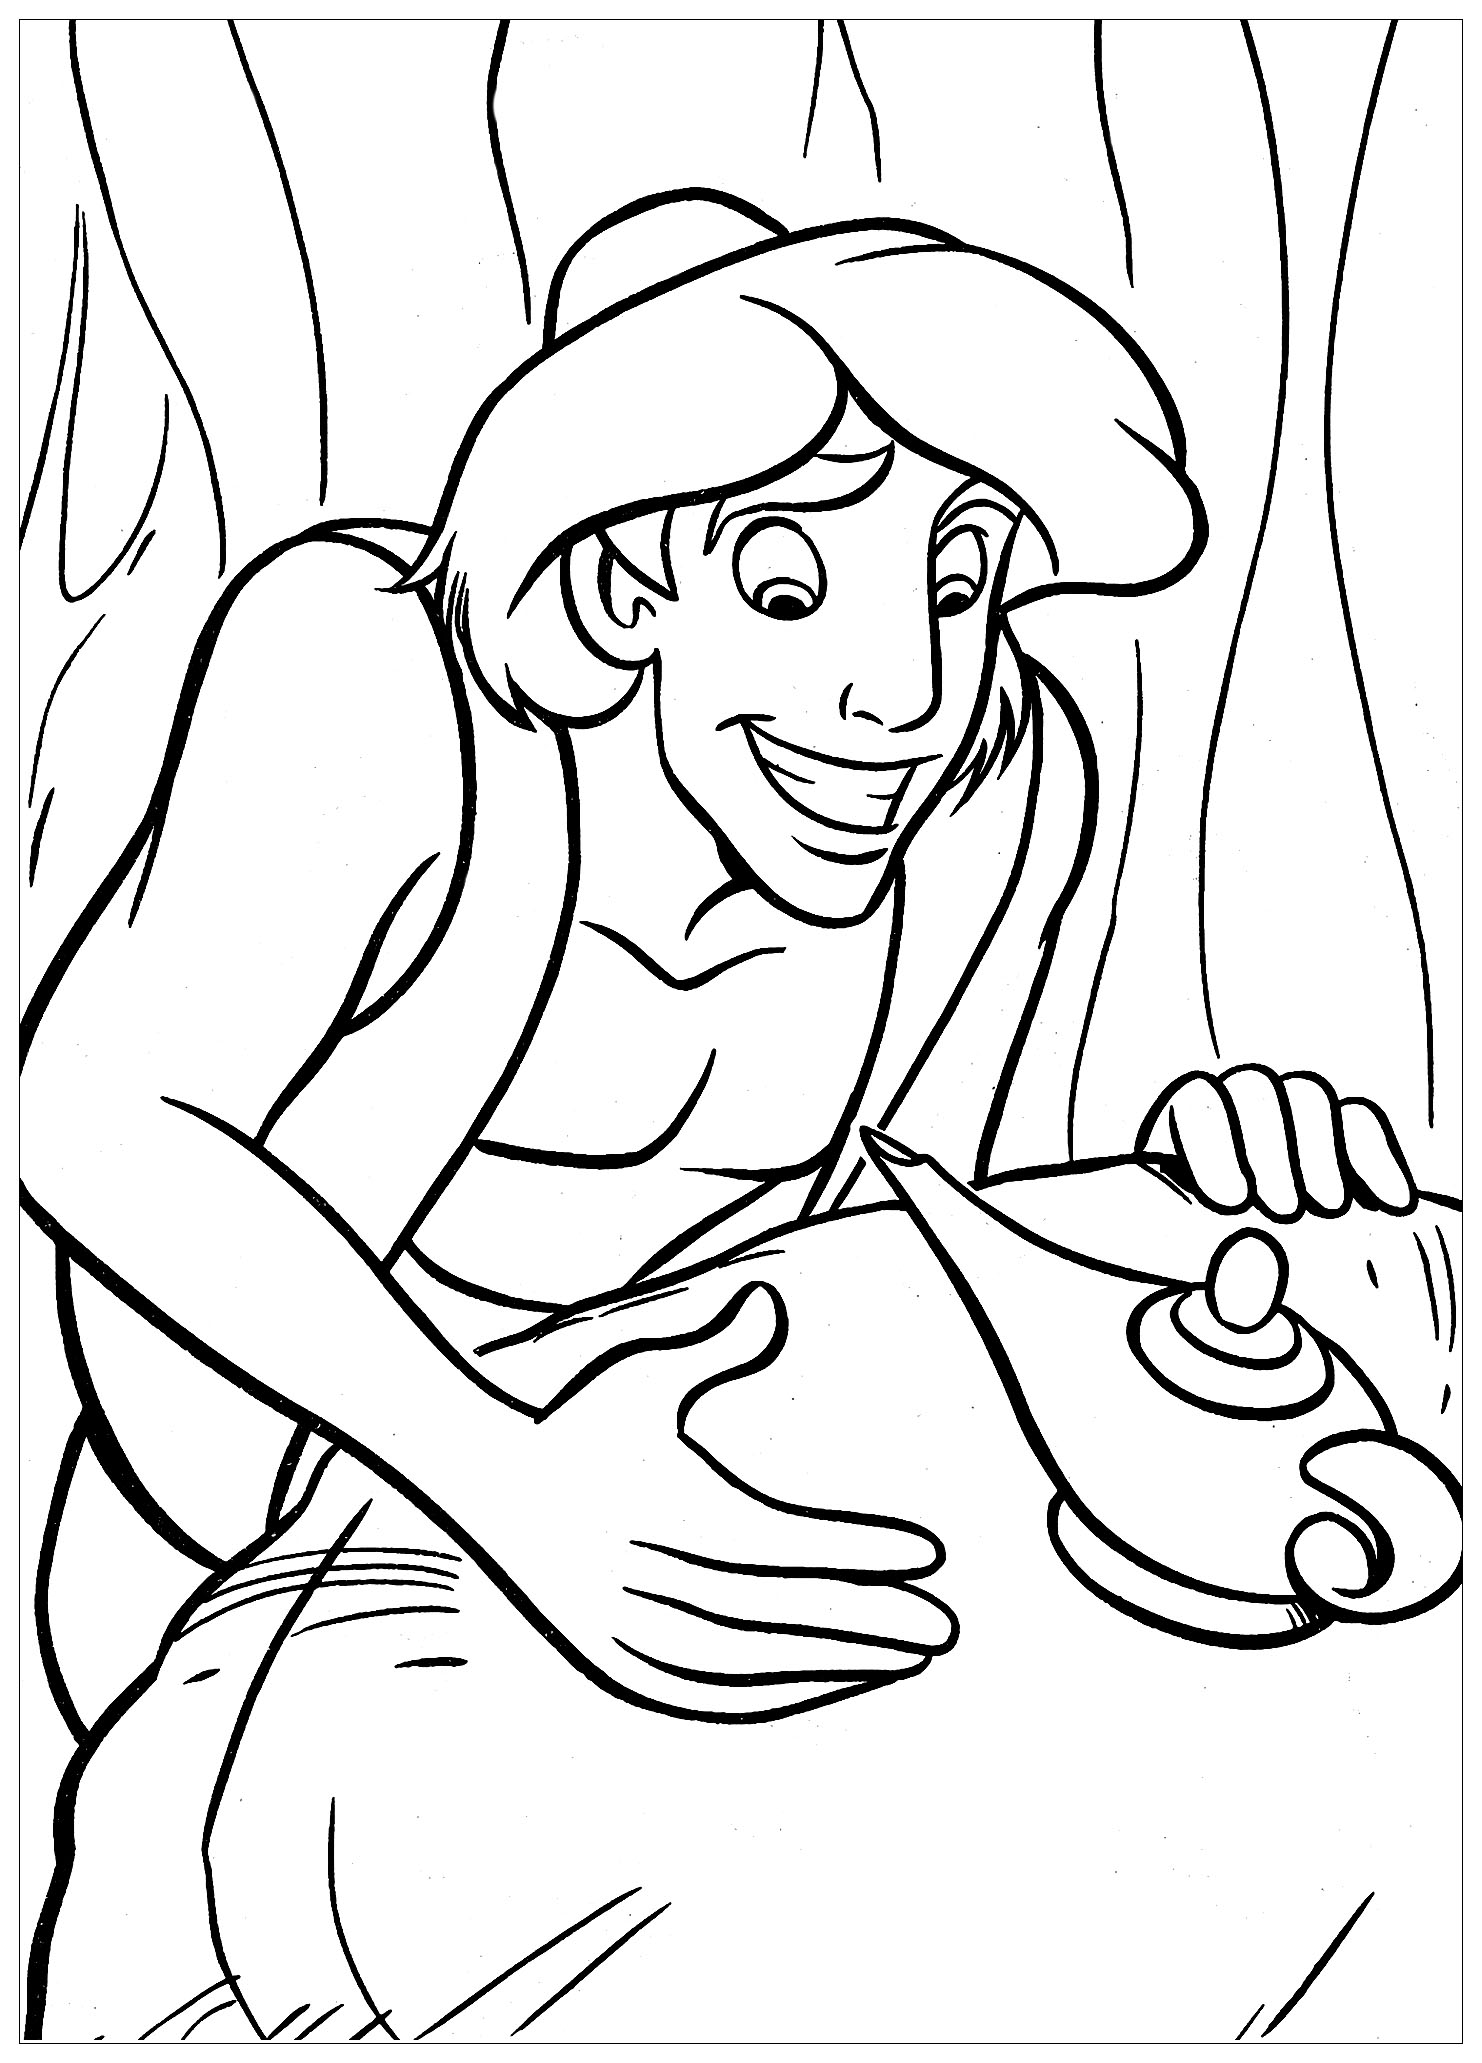 Aladdin With Magic Lamp Coloring Page